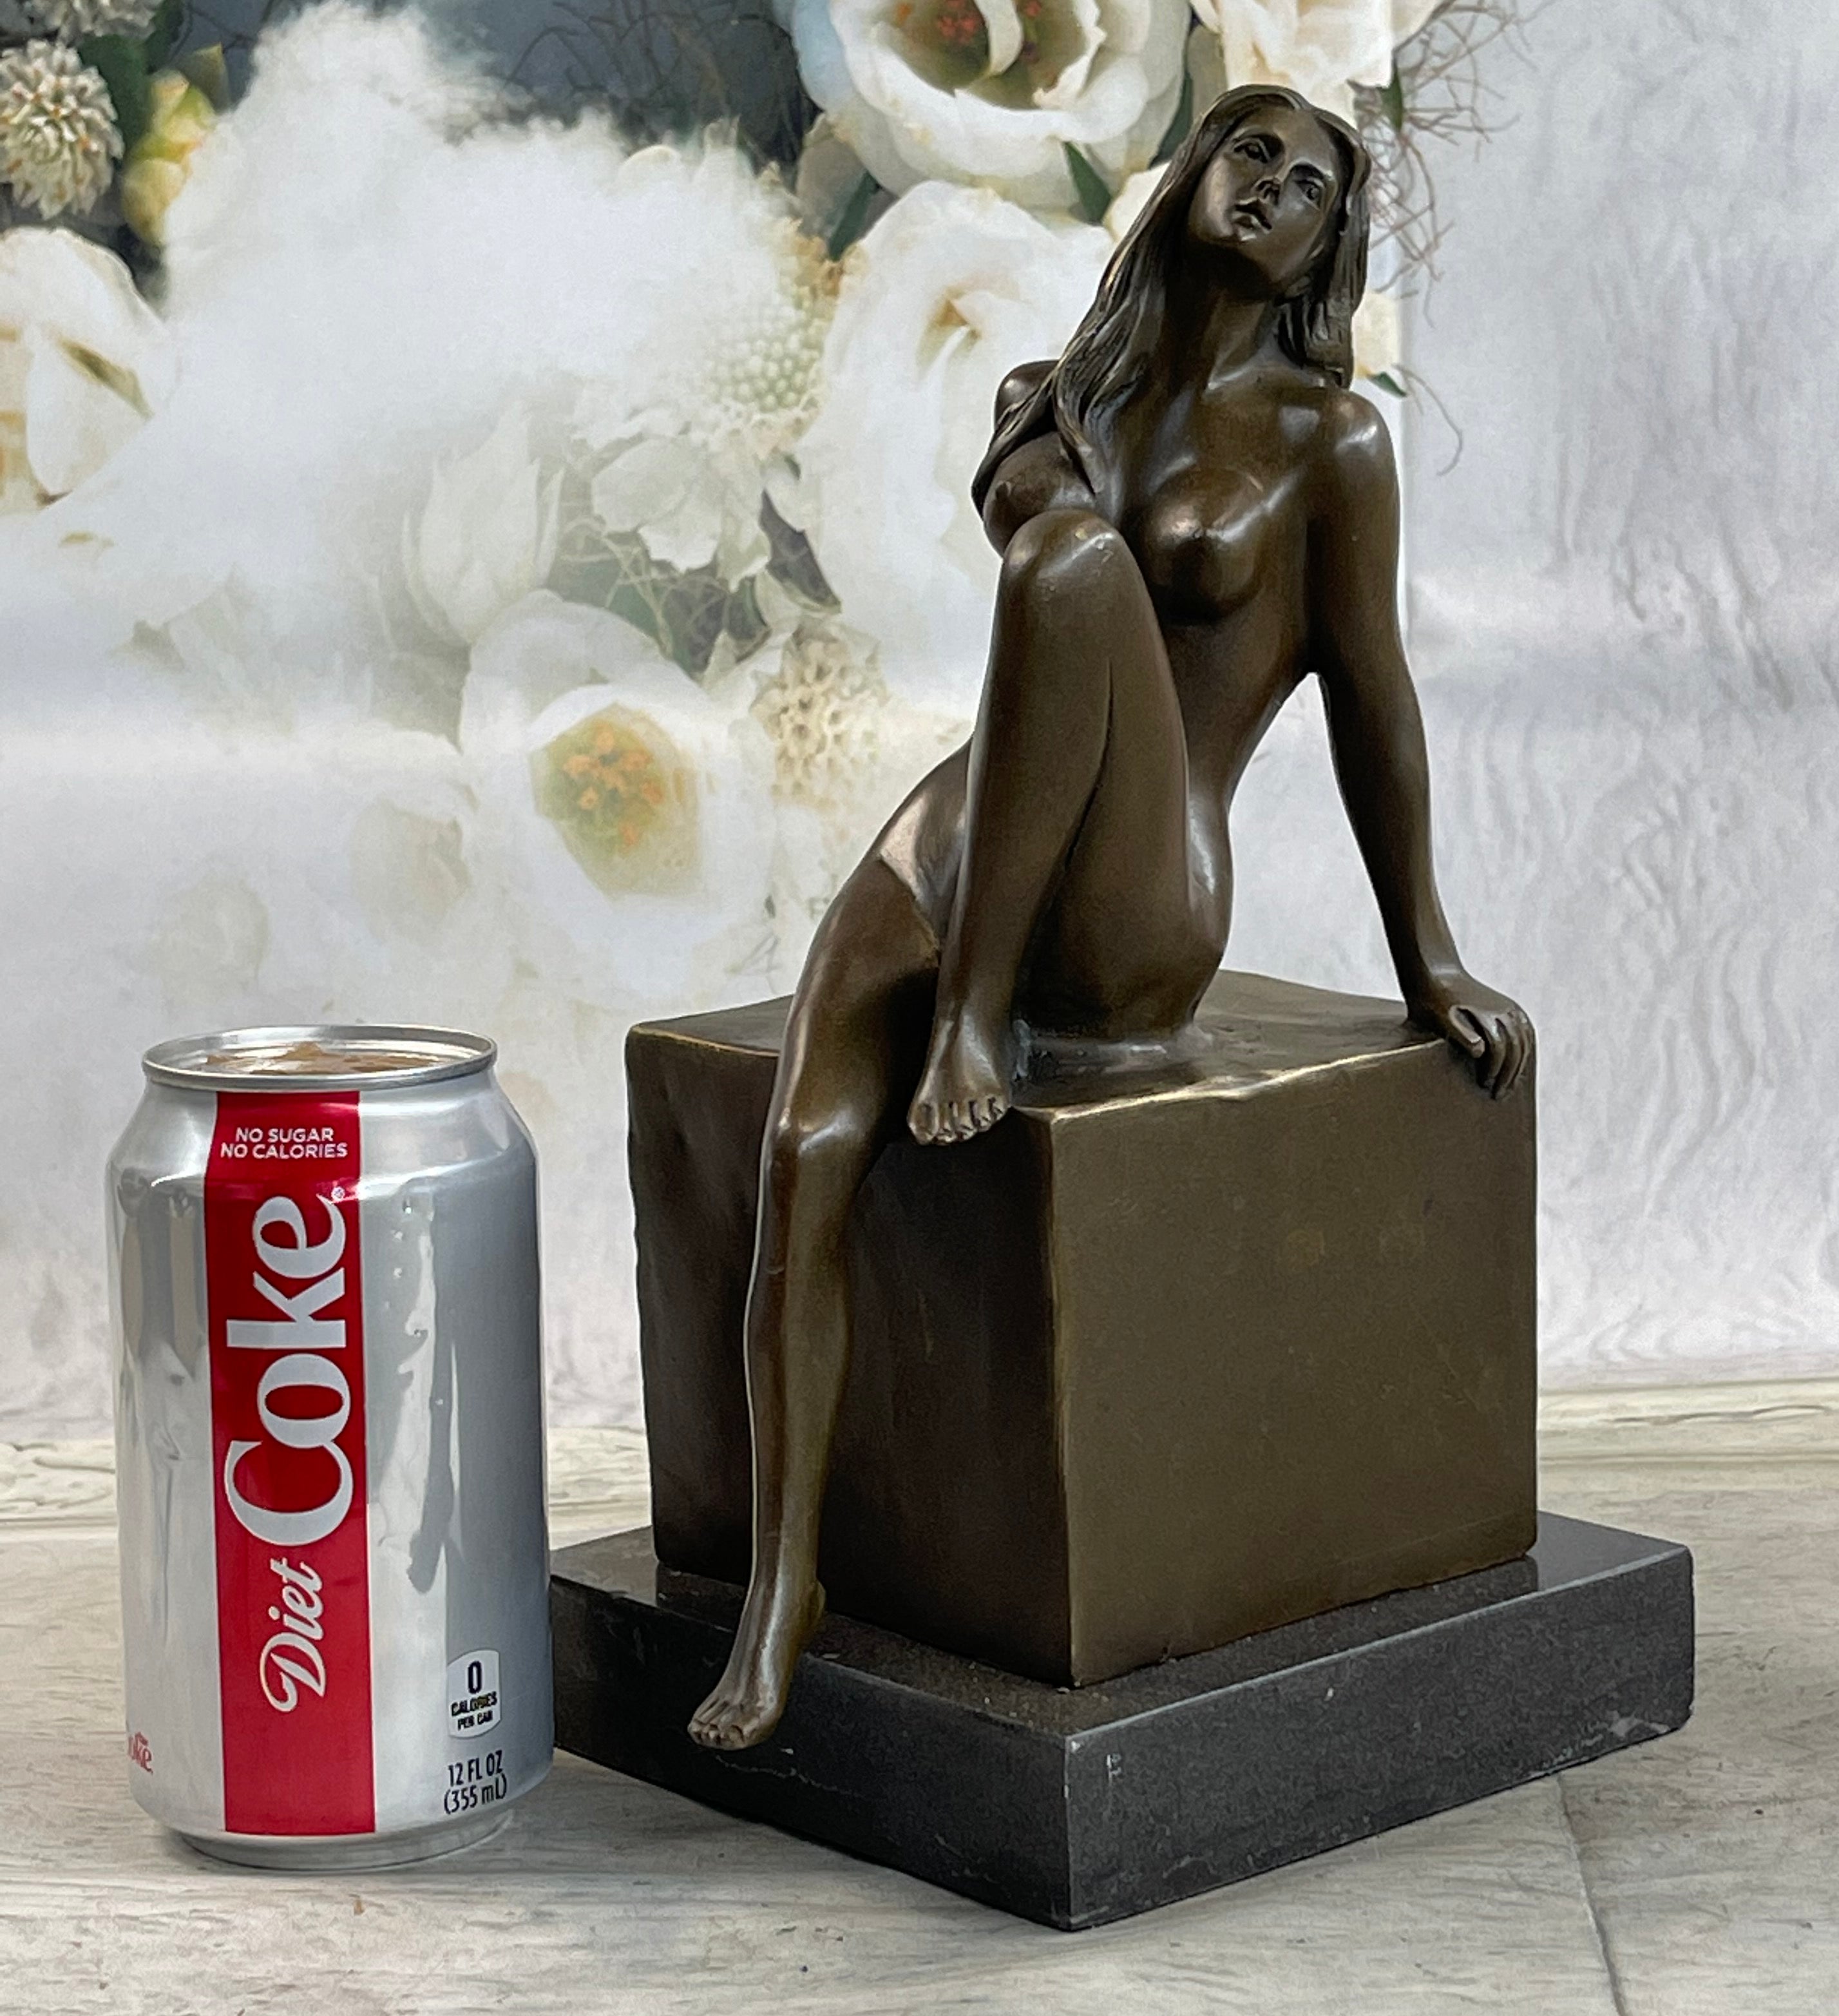 Handcrafted bronze sculpture SALE Decor Home Milo By By Female Exotic Nude